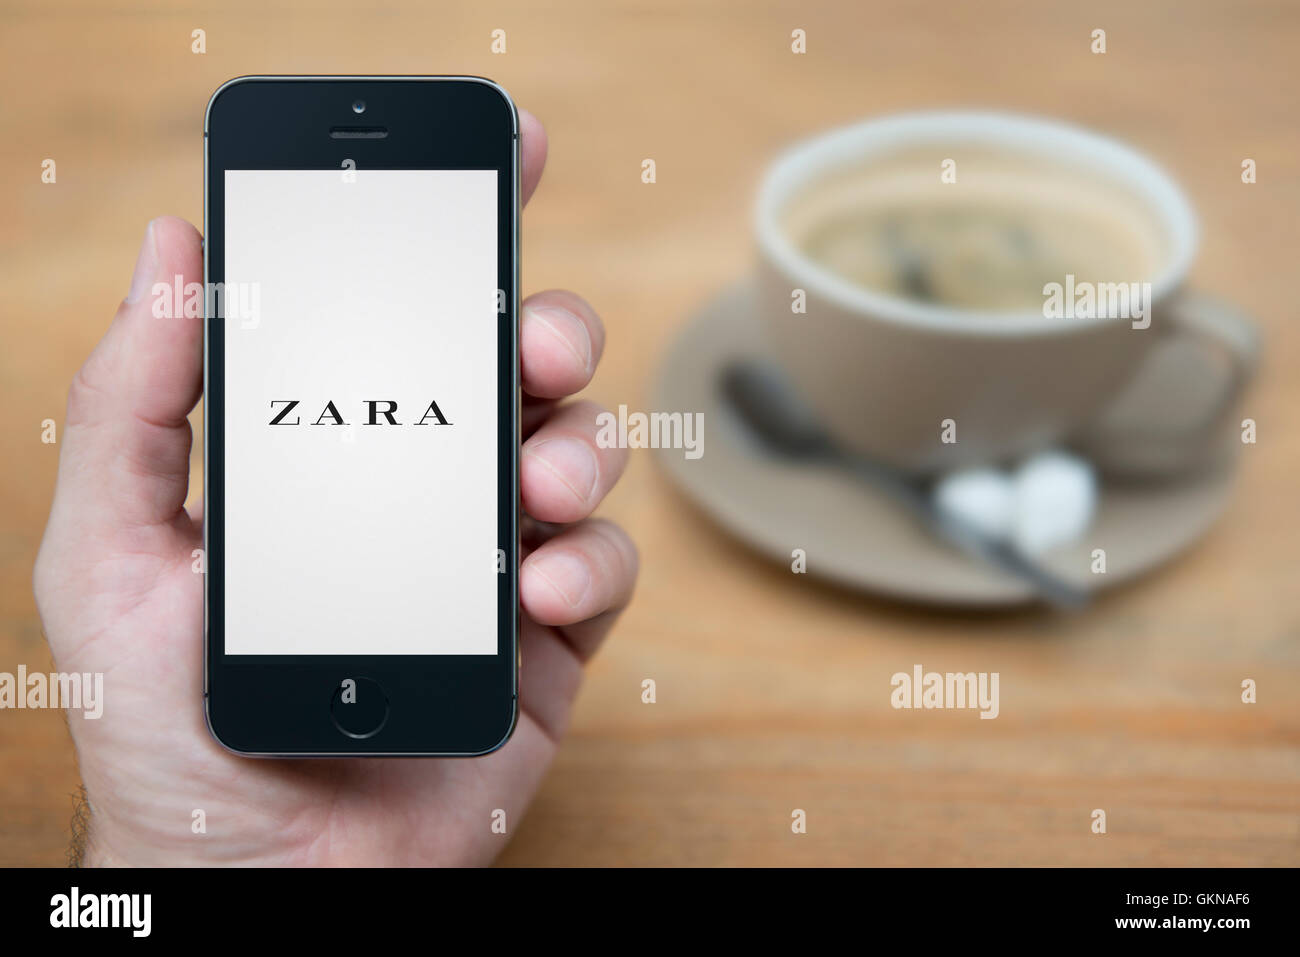 A man looks at his iPhone which displays the Zara logo, while sat with a cup of coffee (Editorial use only). Stock Photo